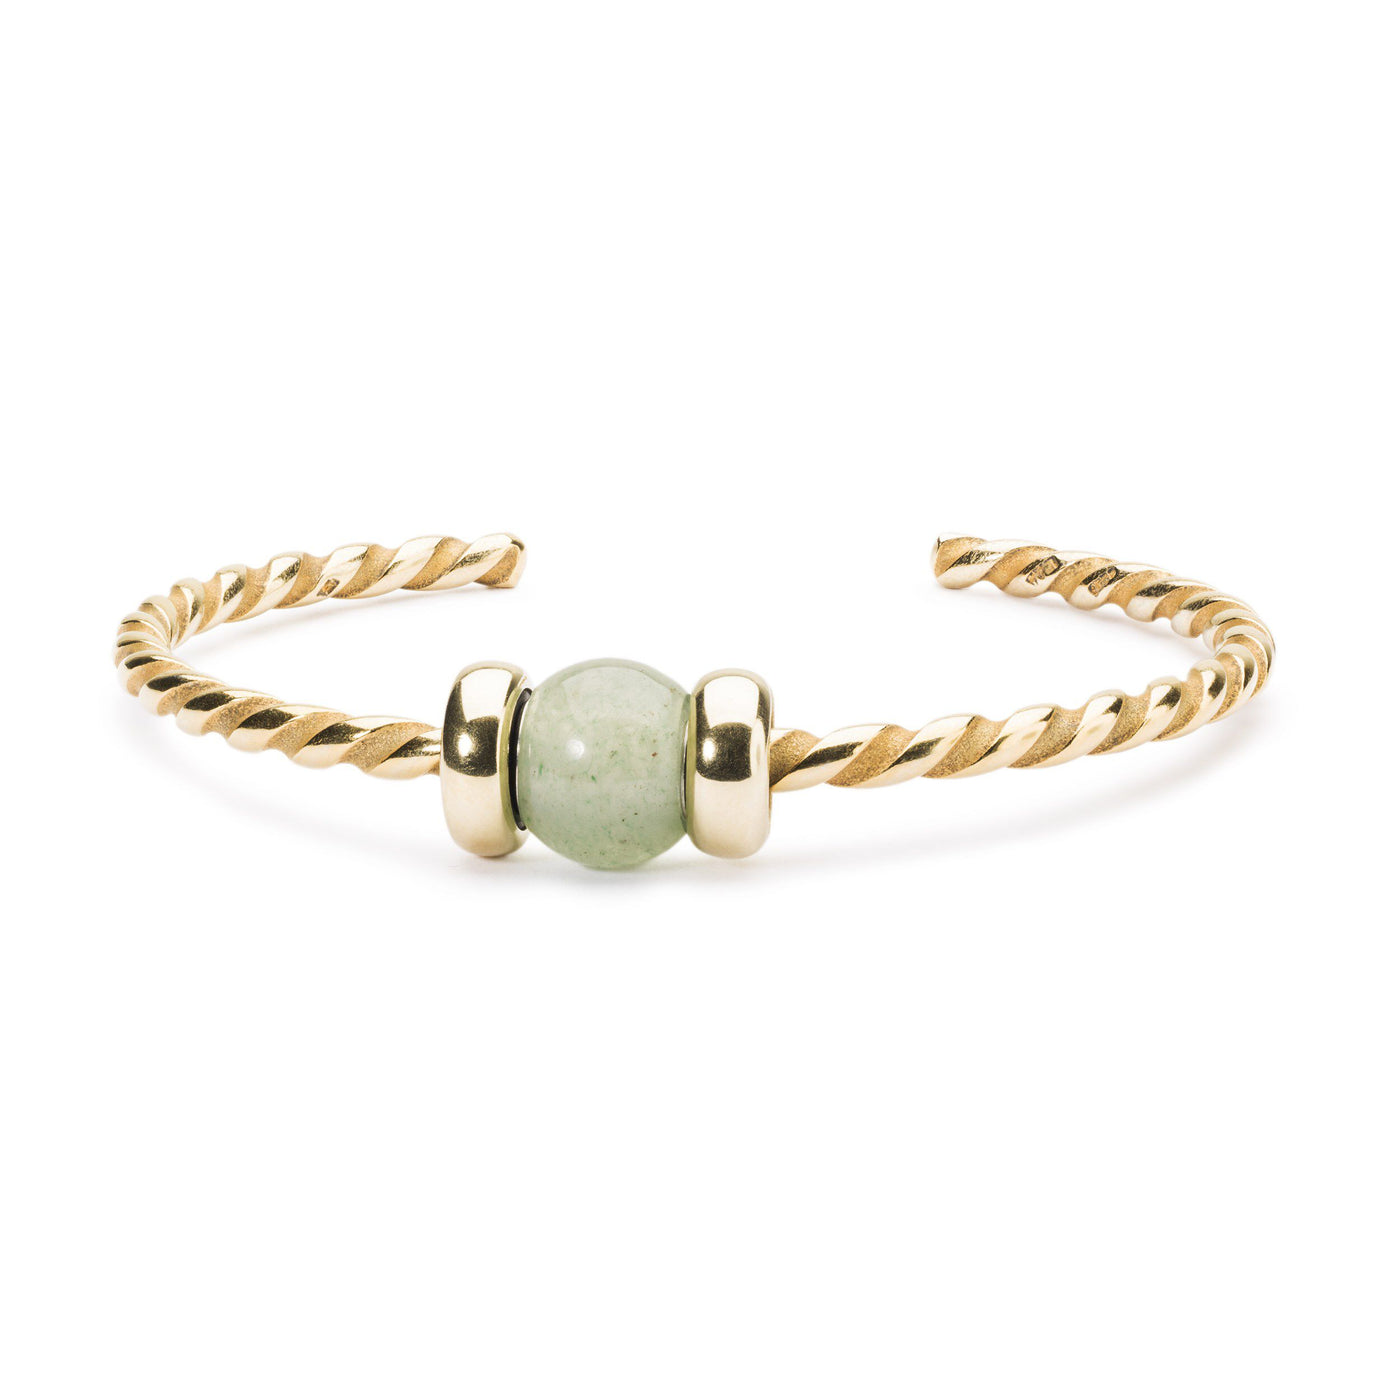 Twisted Gold Plated Bangle - Trollbeads Canada